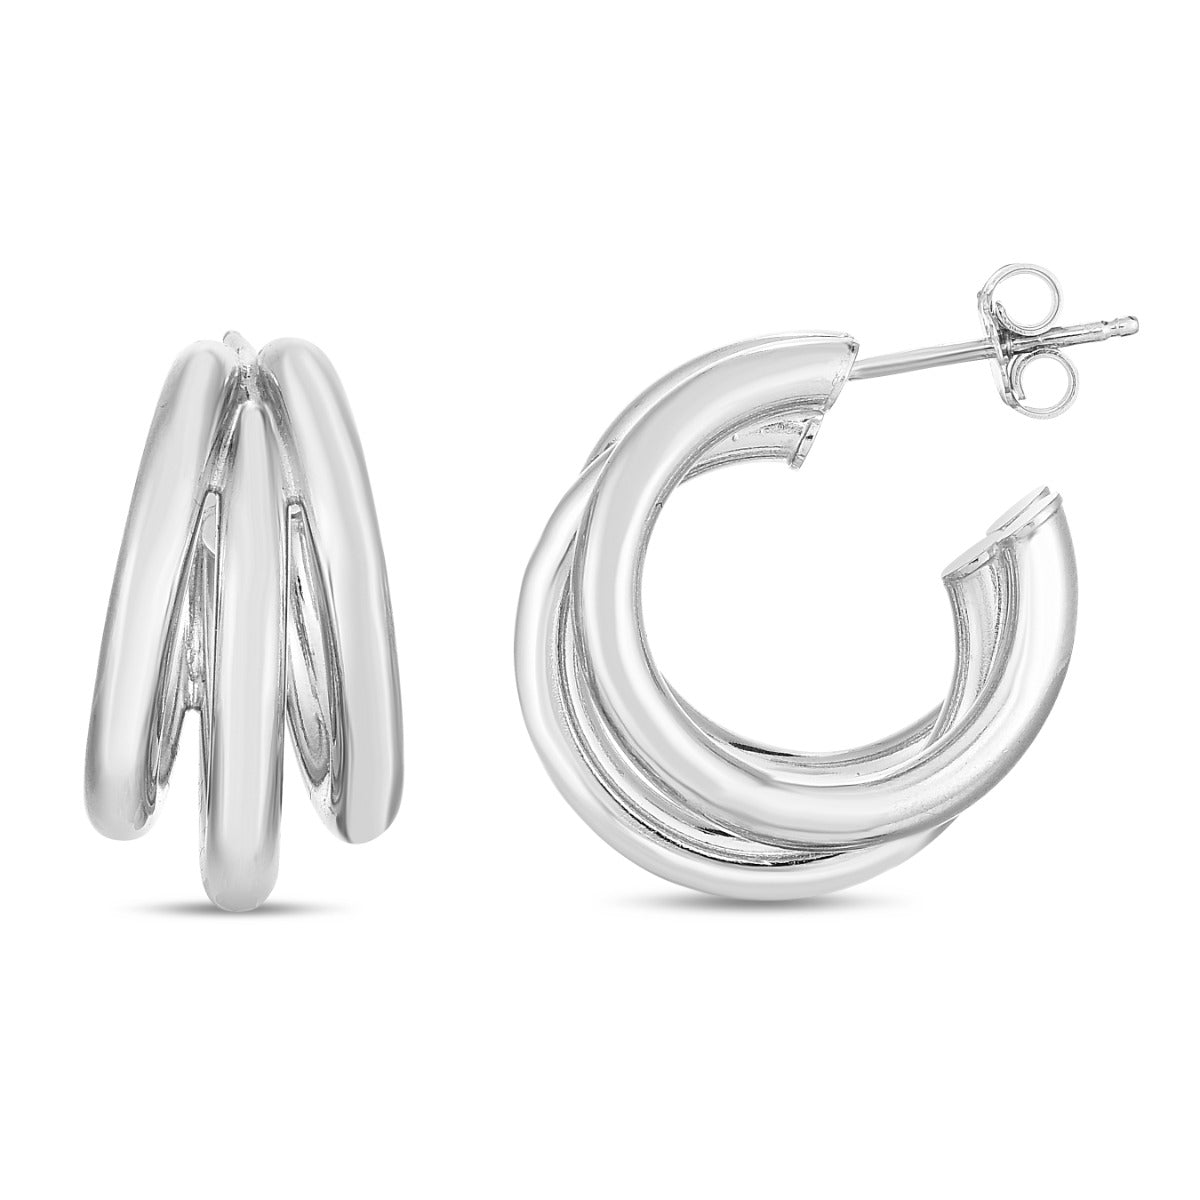 Sterling Silver Polished Triple Barrelled Hoops with Push Back closure